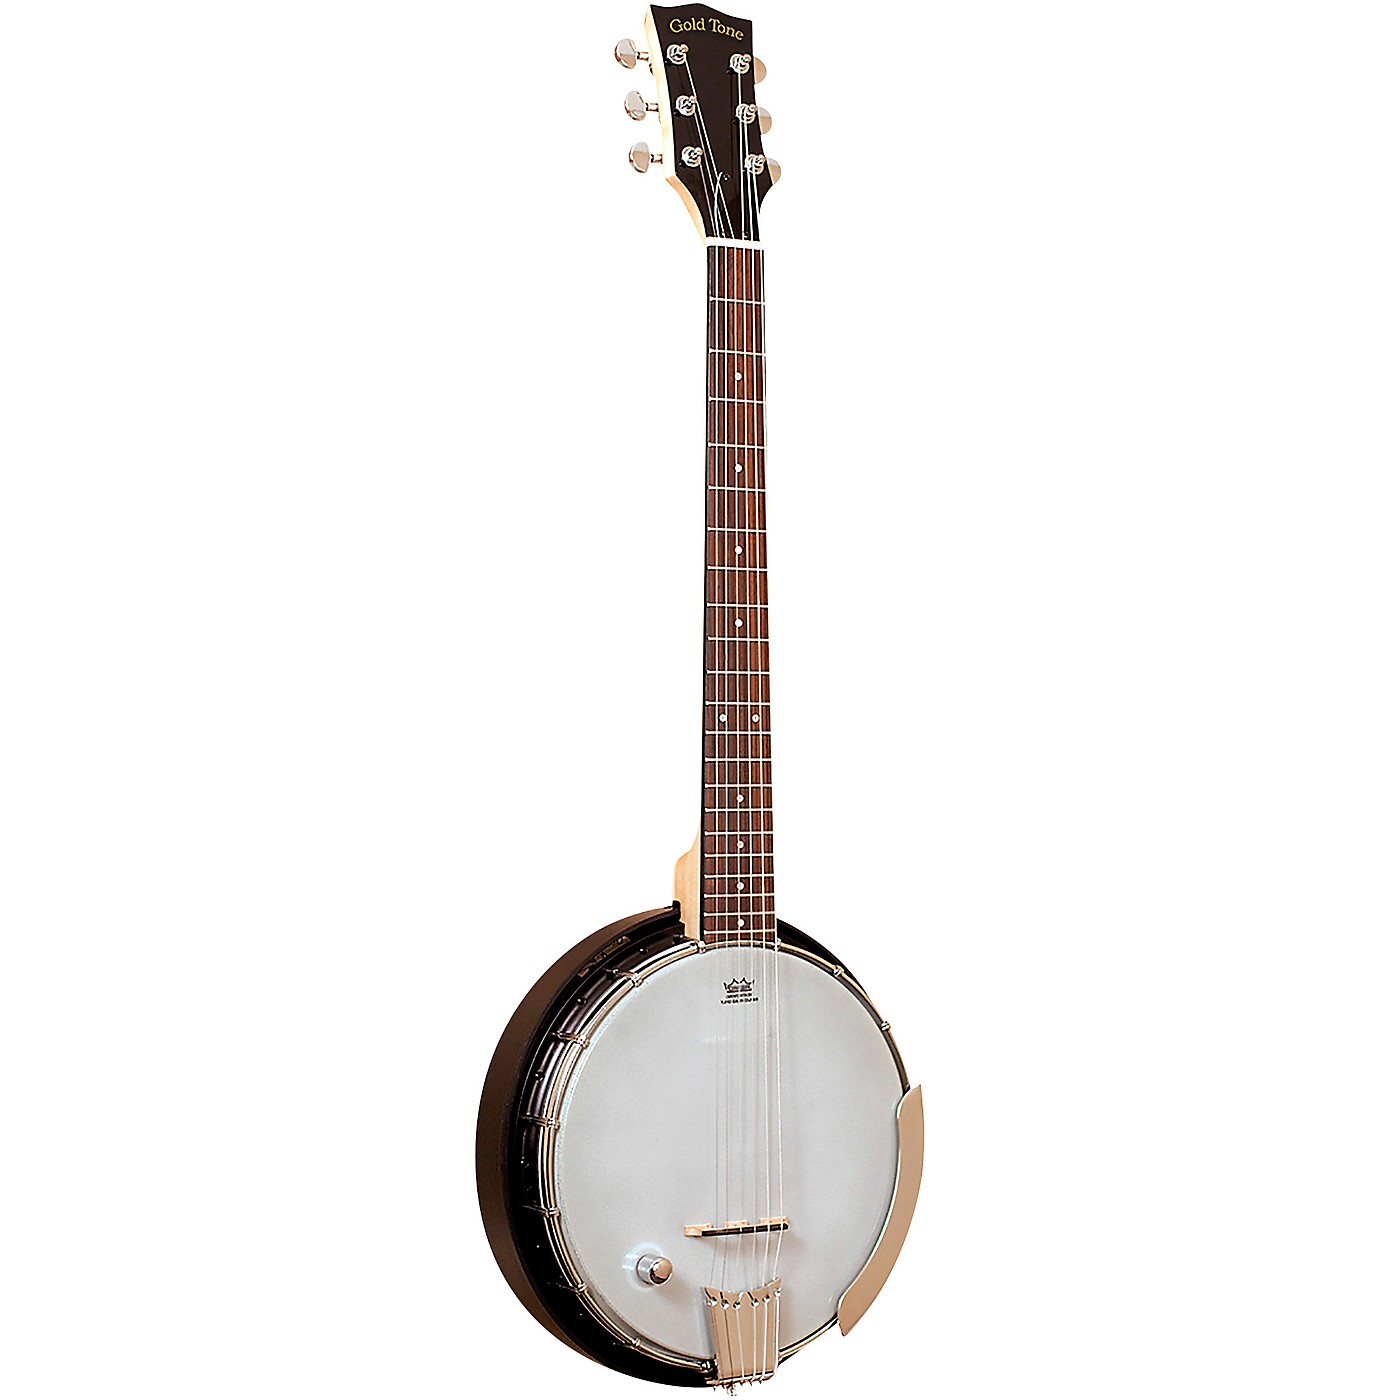 Gold Tone AC-6+/L Composite Left-Handed Acoustic-Electric Banjo Guitar With Gig Bag thumbnail